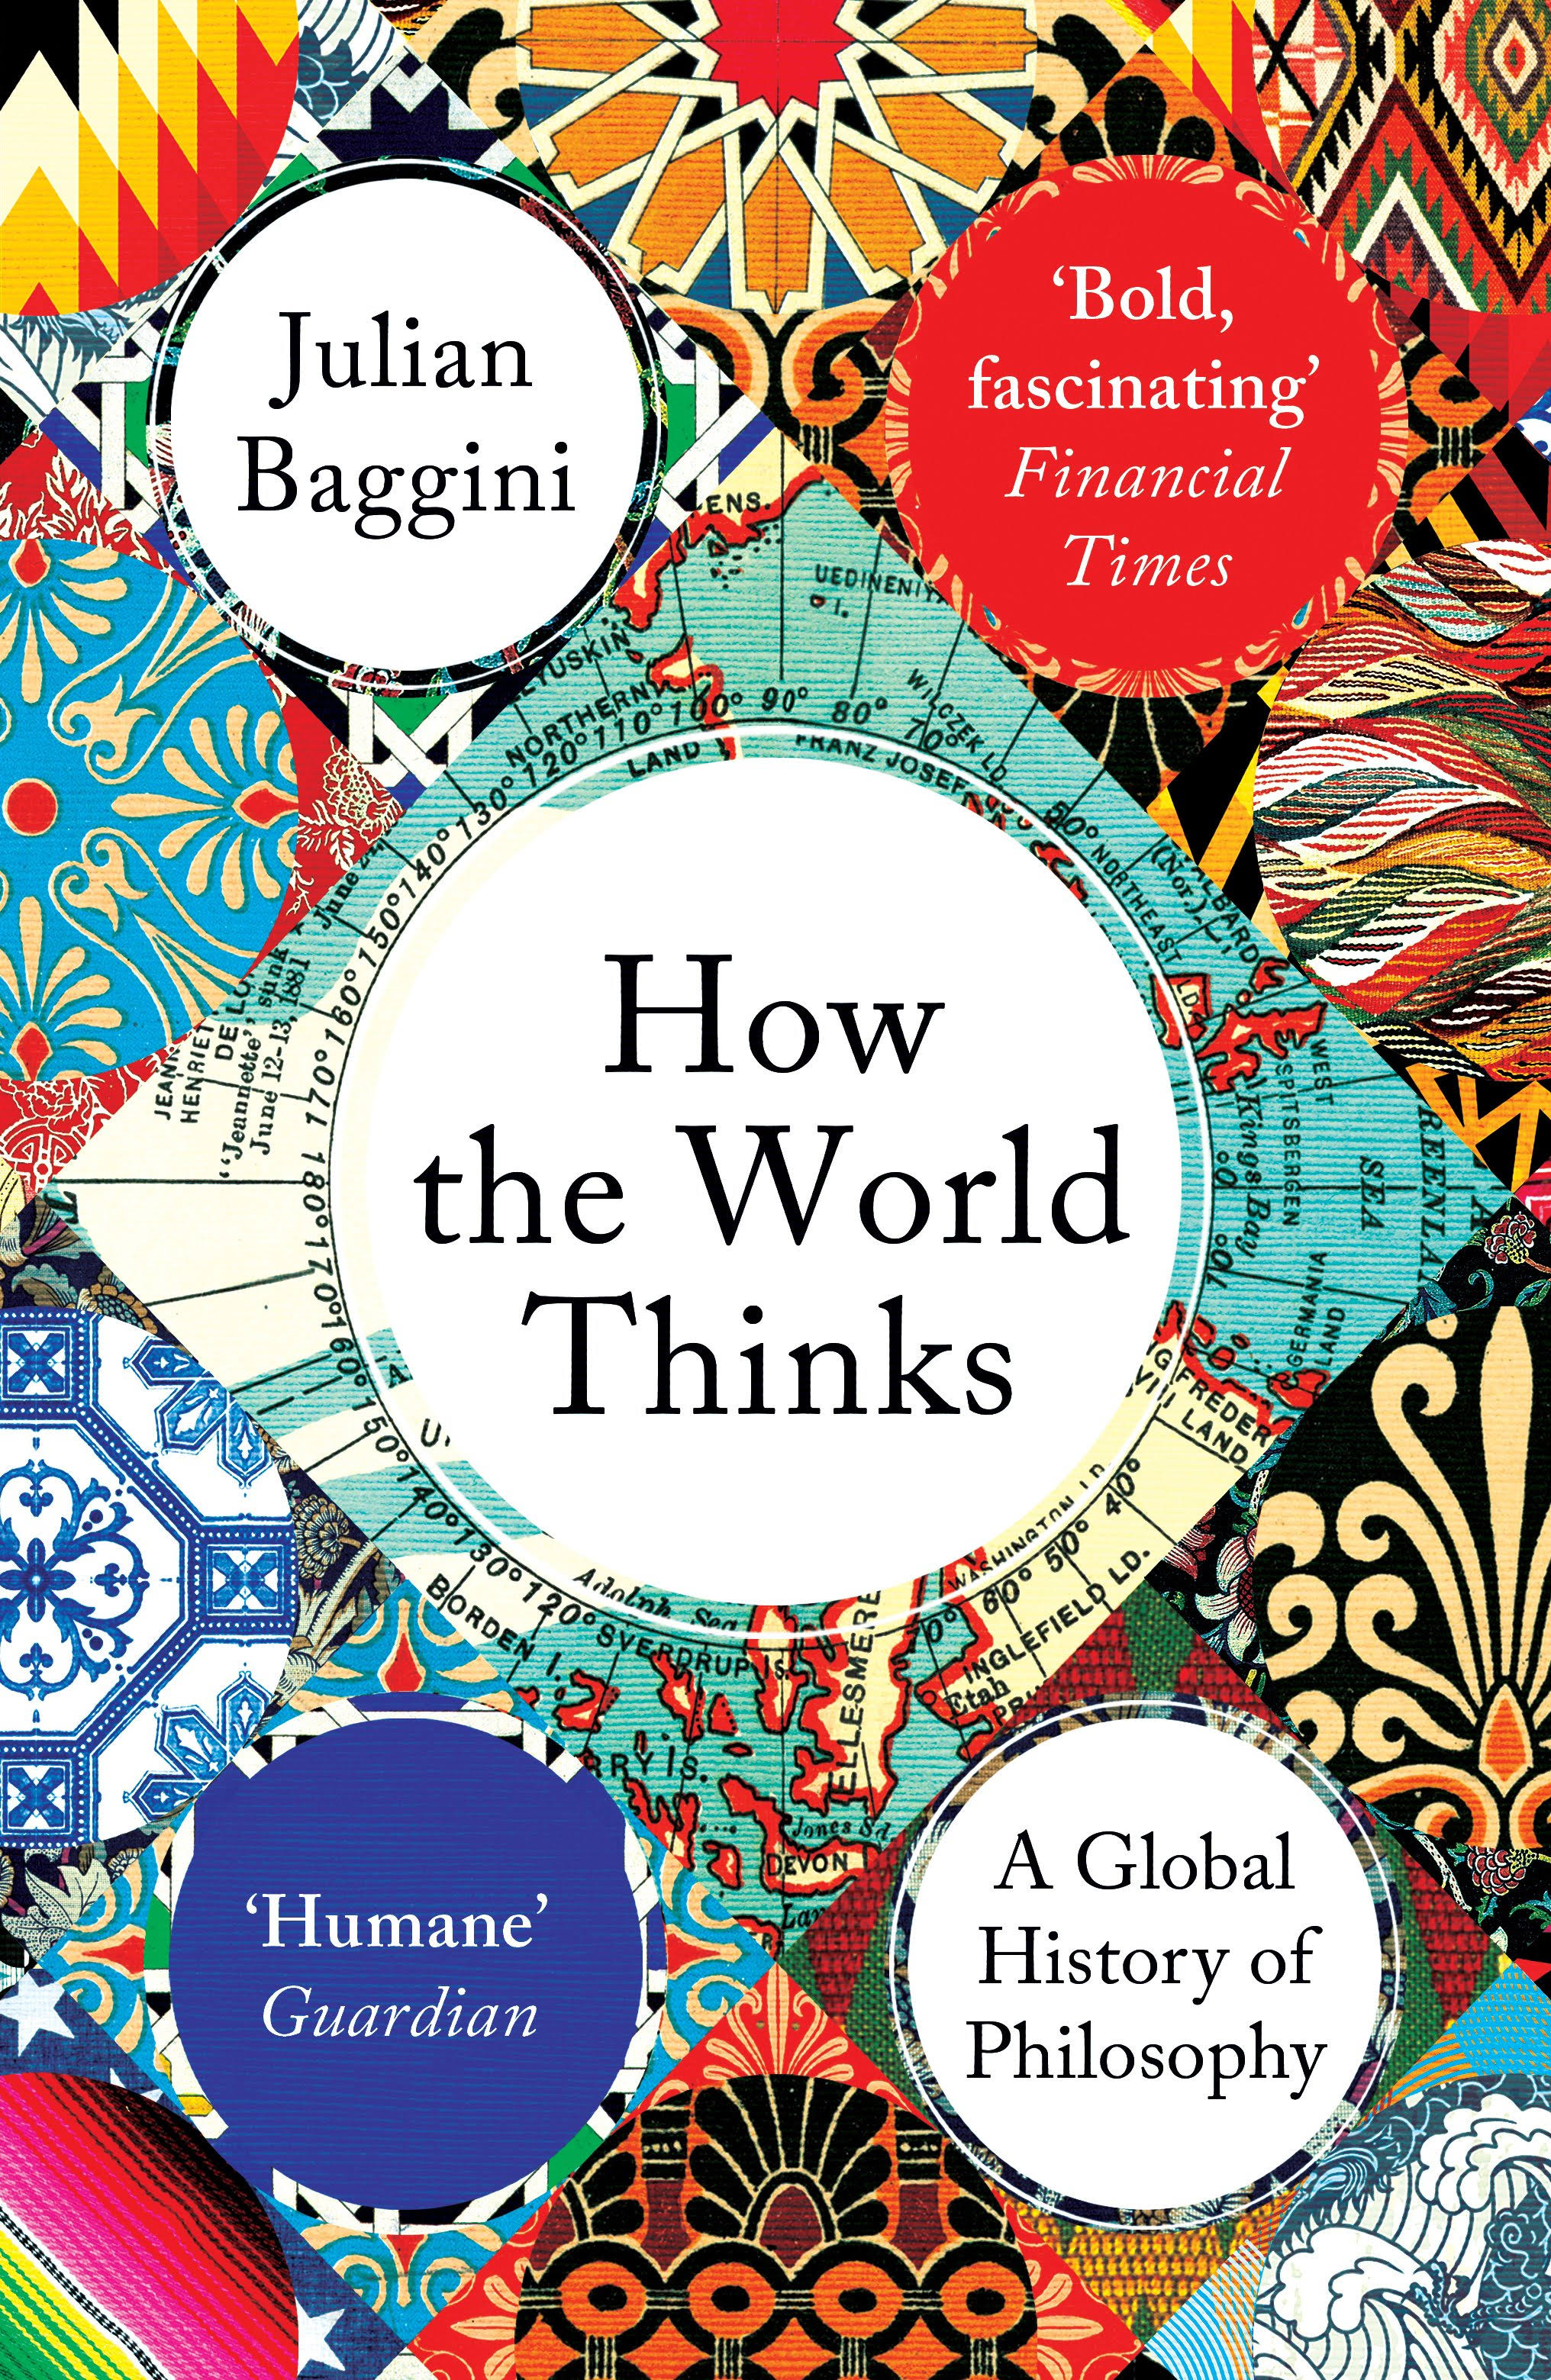 How the World Thinks: A Global History of Philosophy [Book]